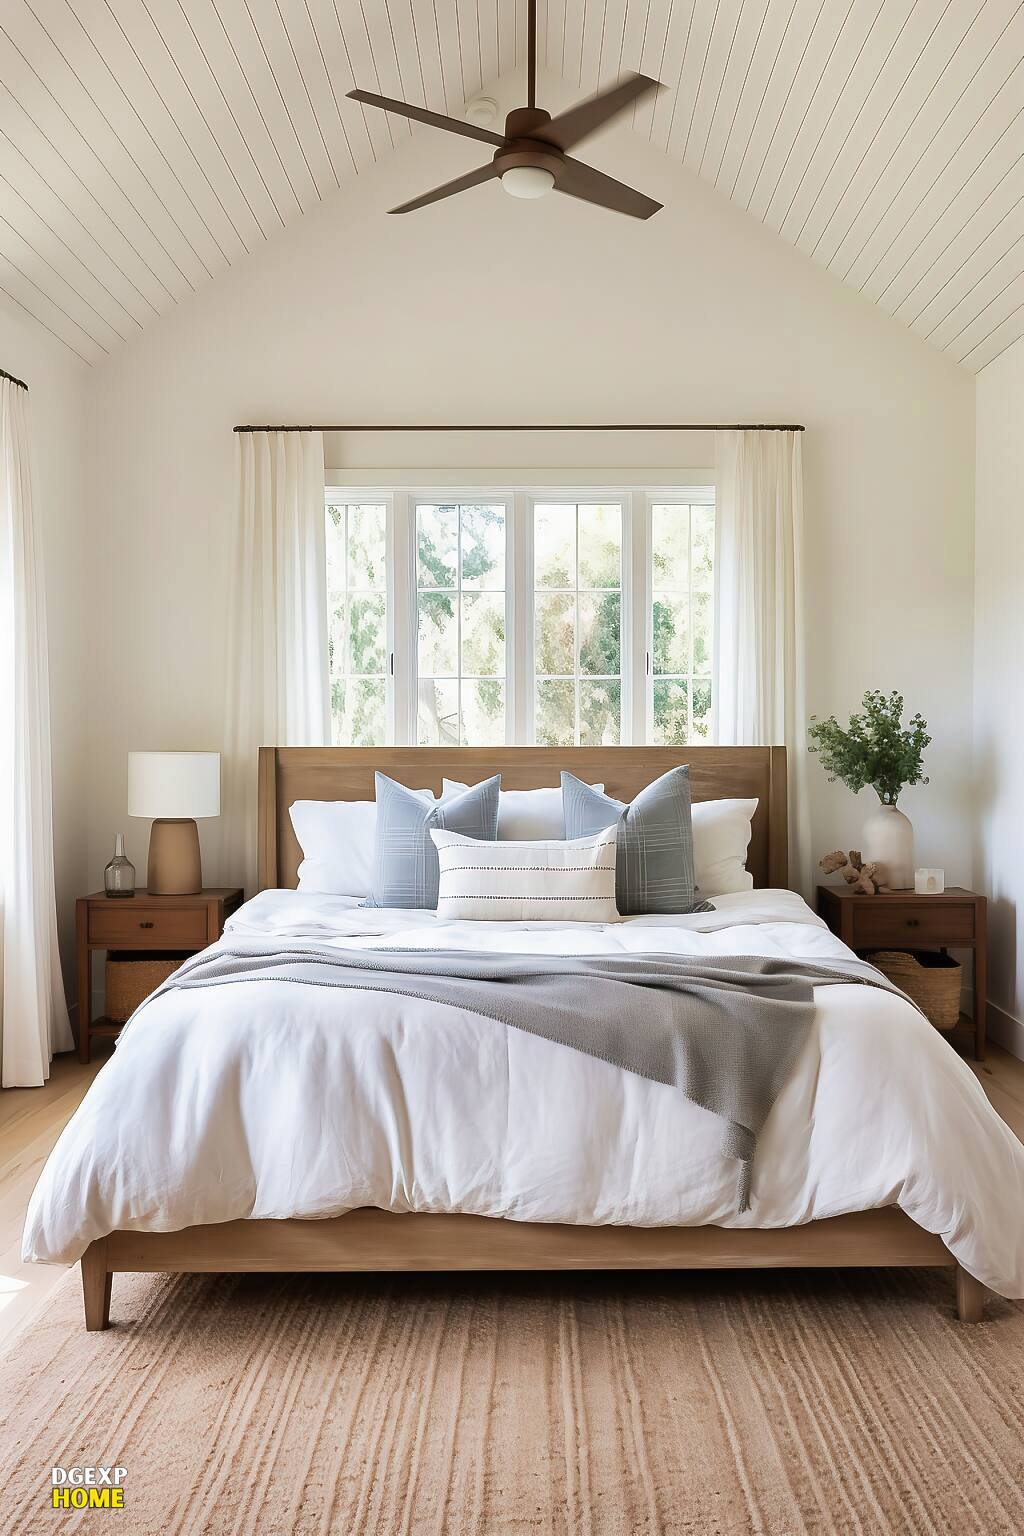 Airy Minimalist Farmhouse Bedroom With Natural Wood And Soft White Textiles.